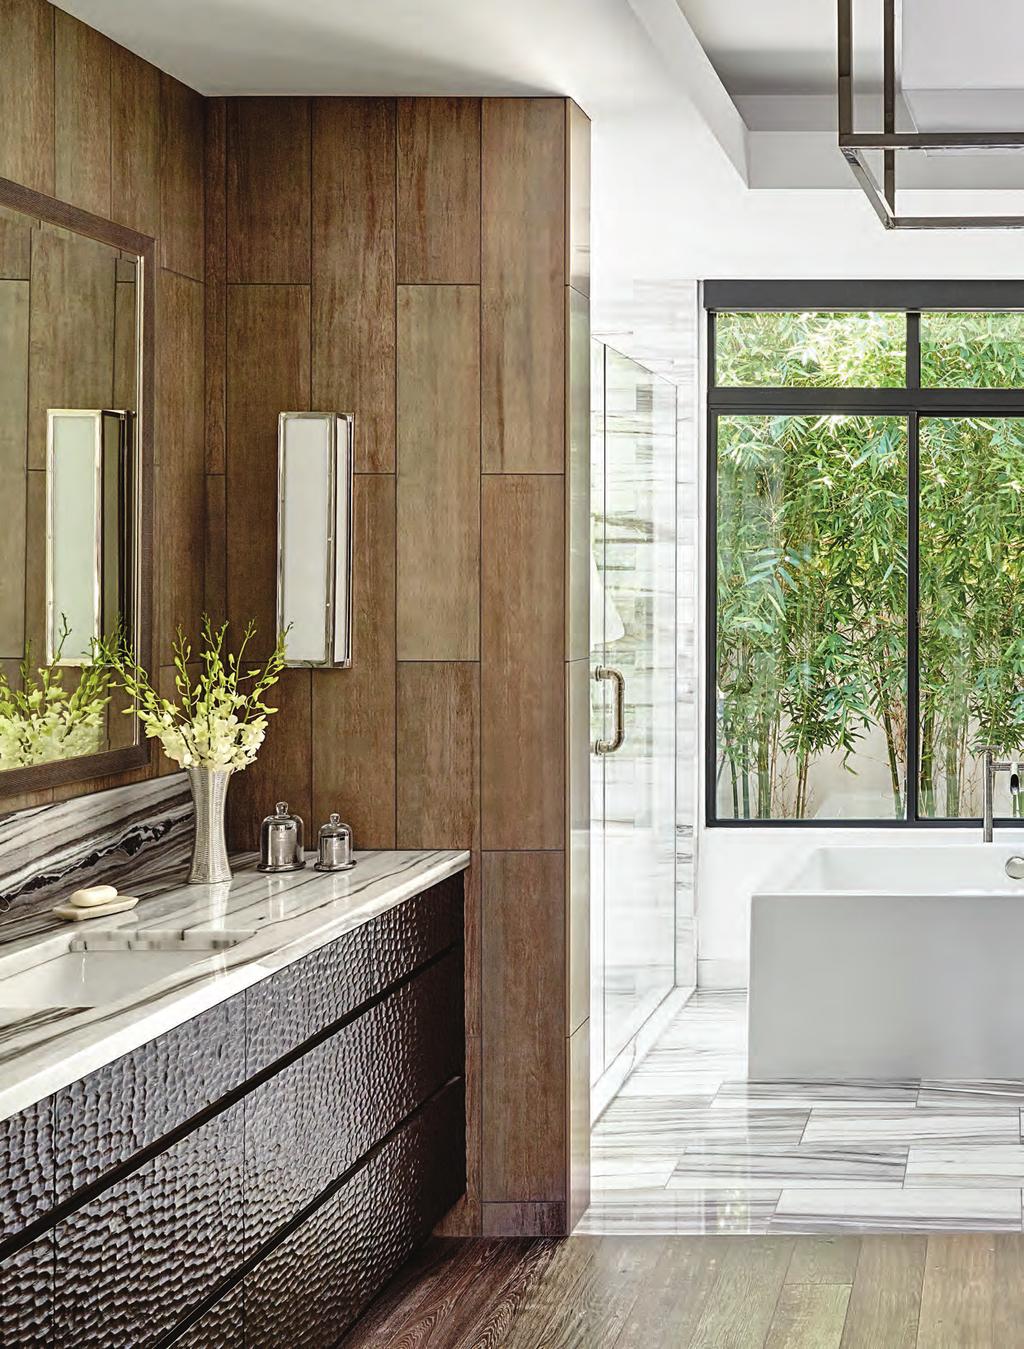 92 Elegant Homes The use of two different floor coverings creates an elegant distinction between the bathing and dressing areas of the T-shape master bath.